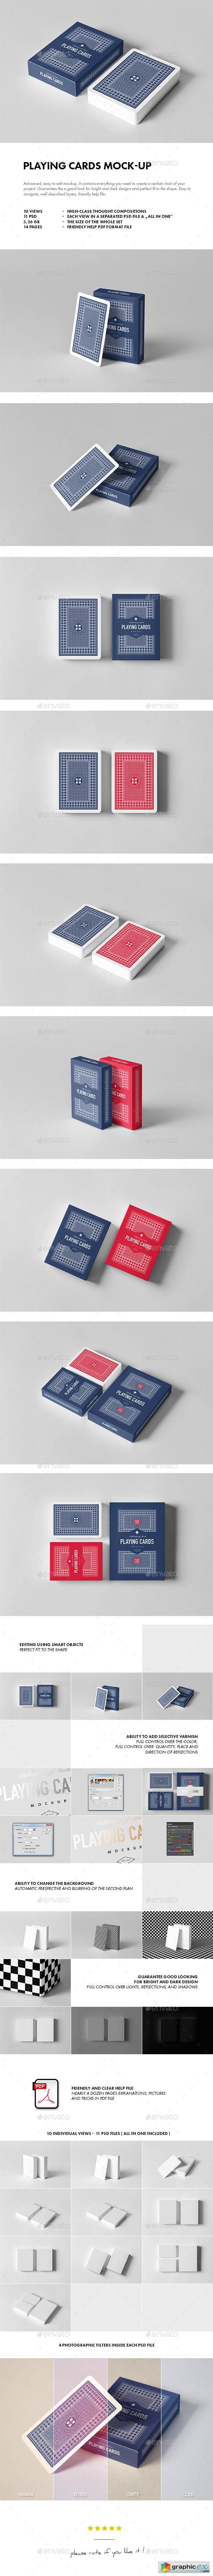 Playing Card Mock-up